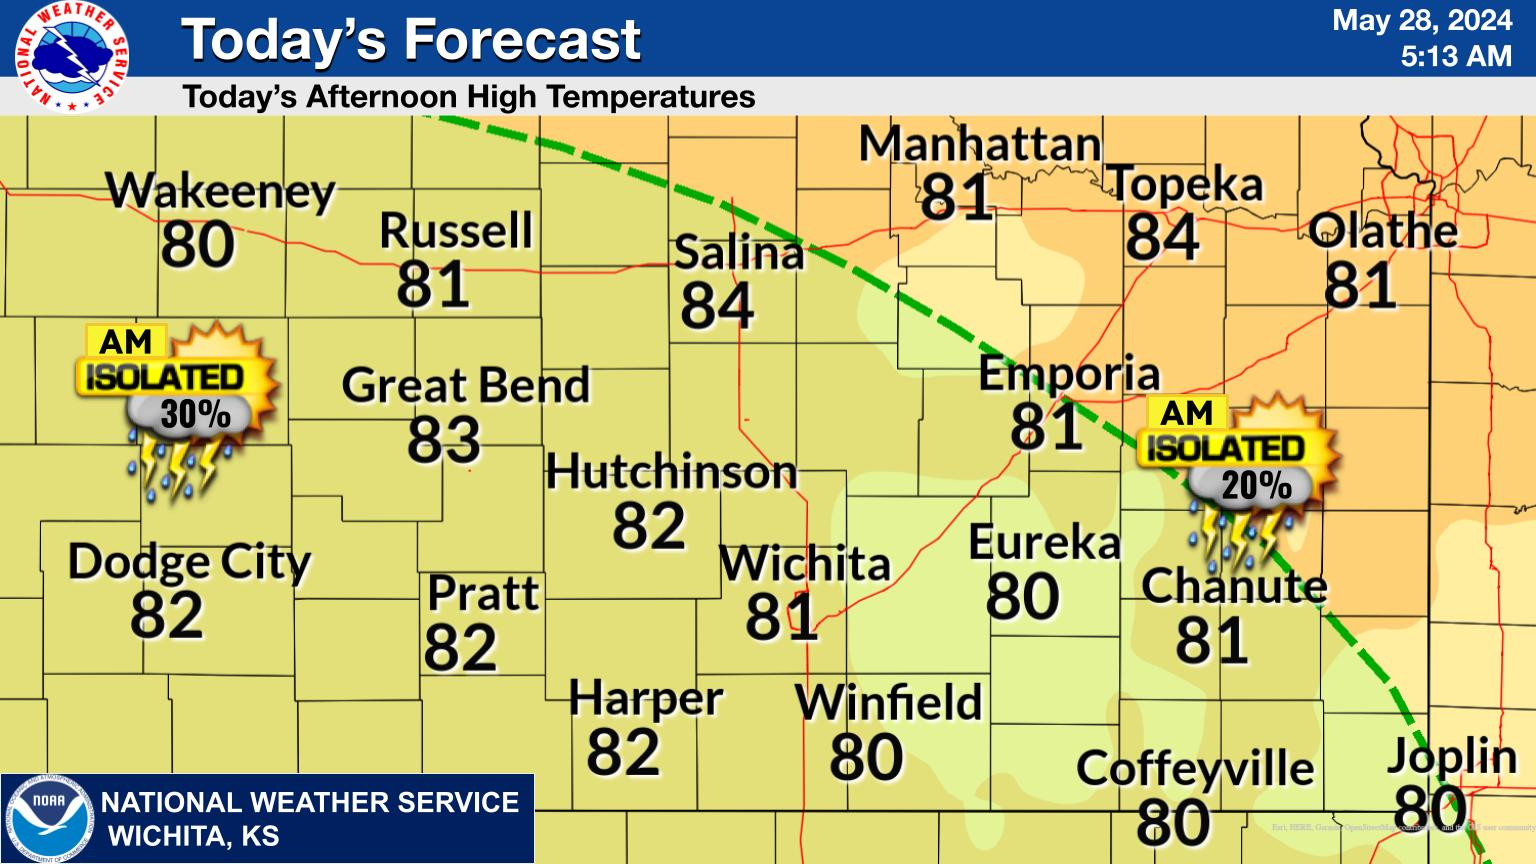 Scattered Storms Expected for Southern Kansas, Severe Weather Unlikely